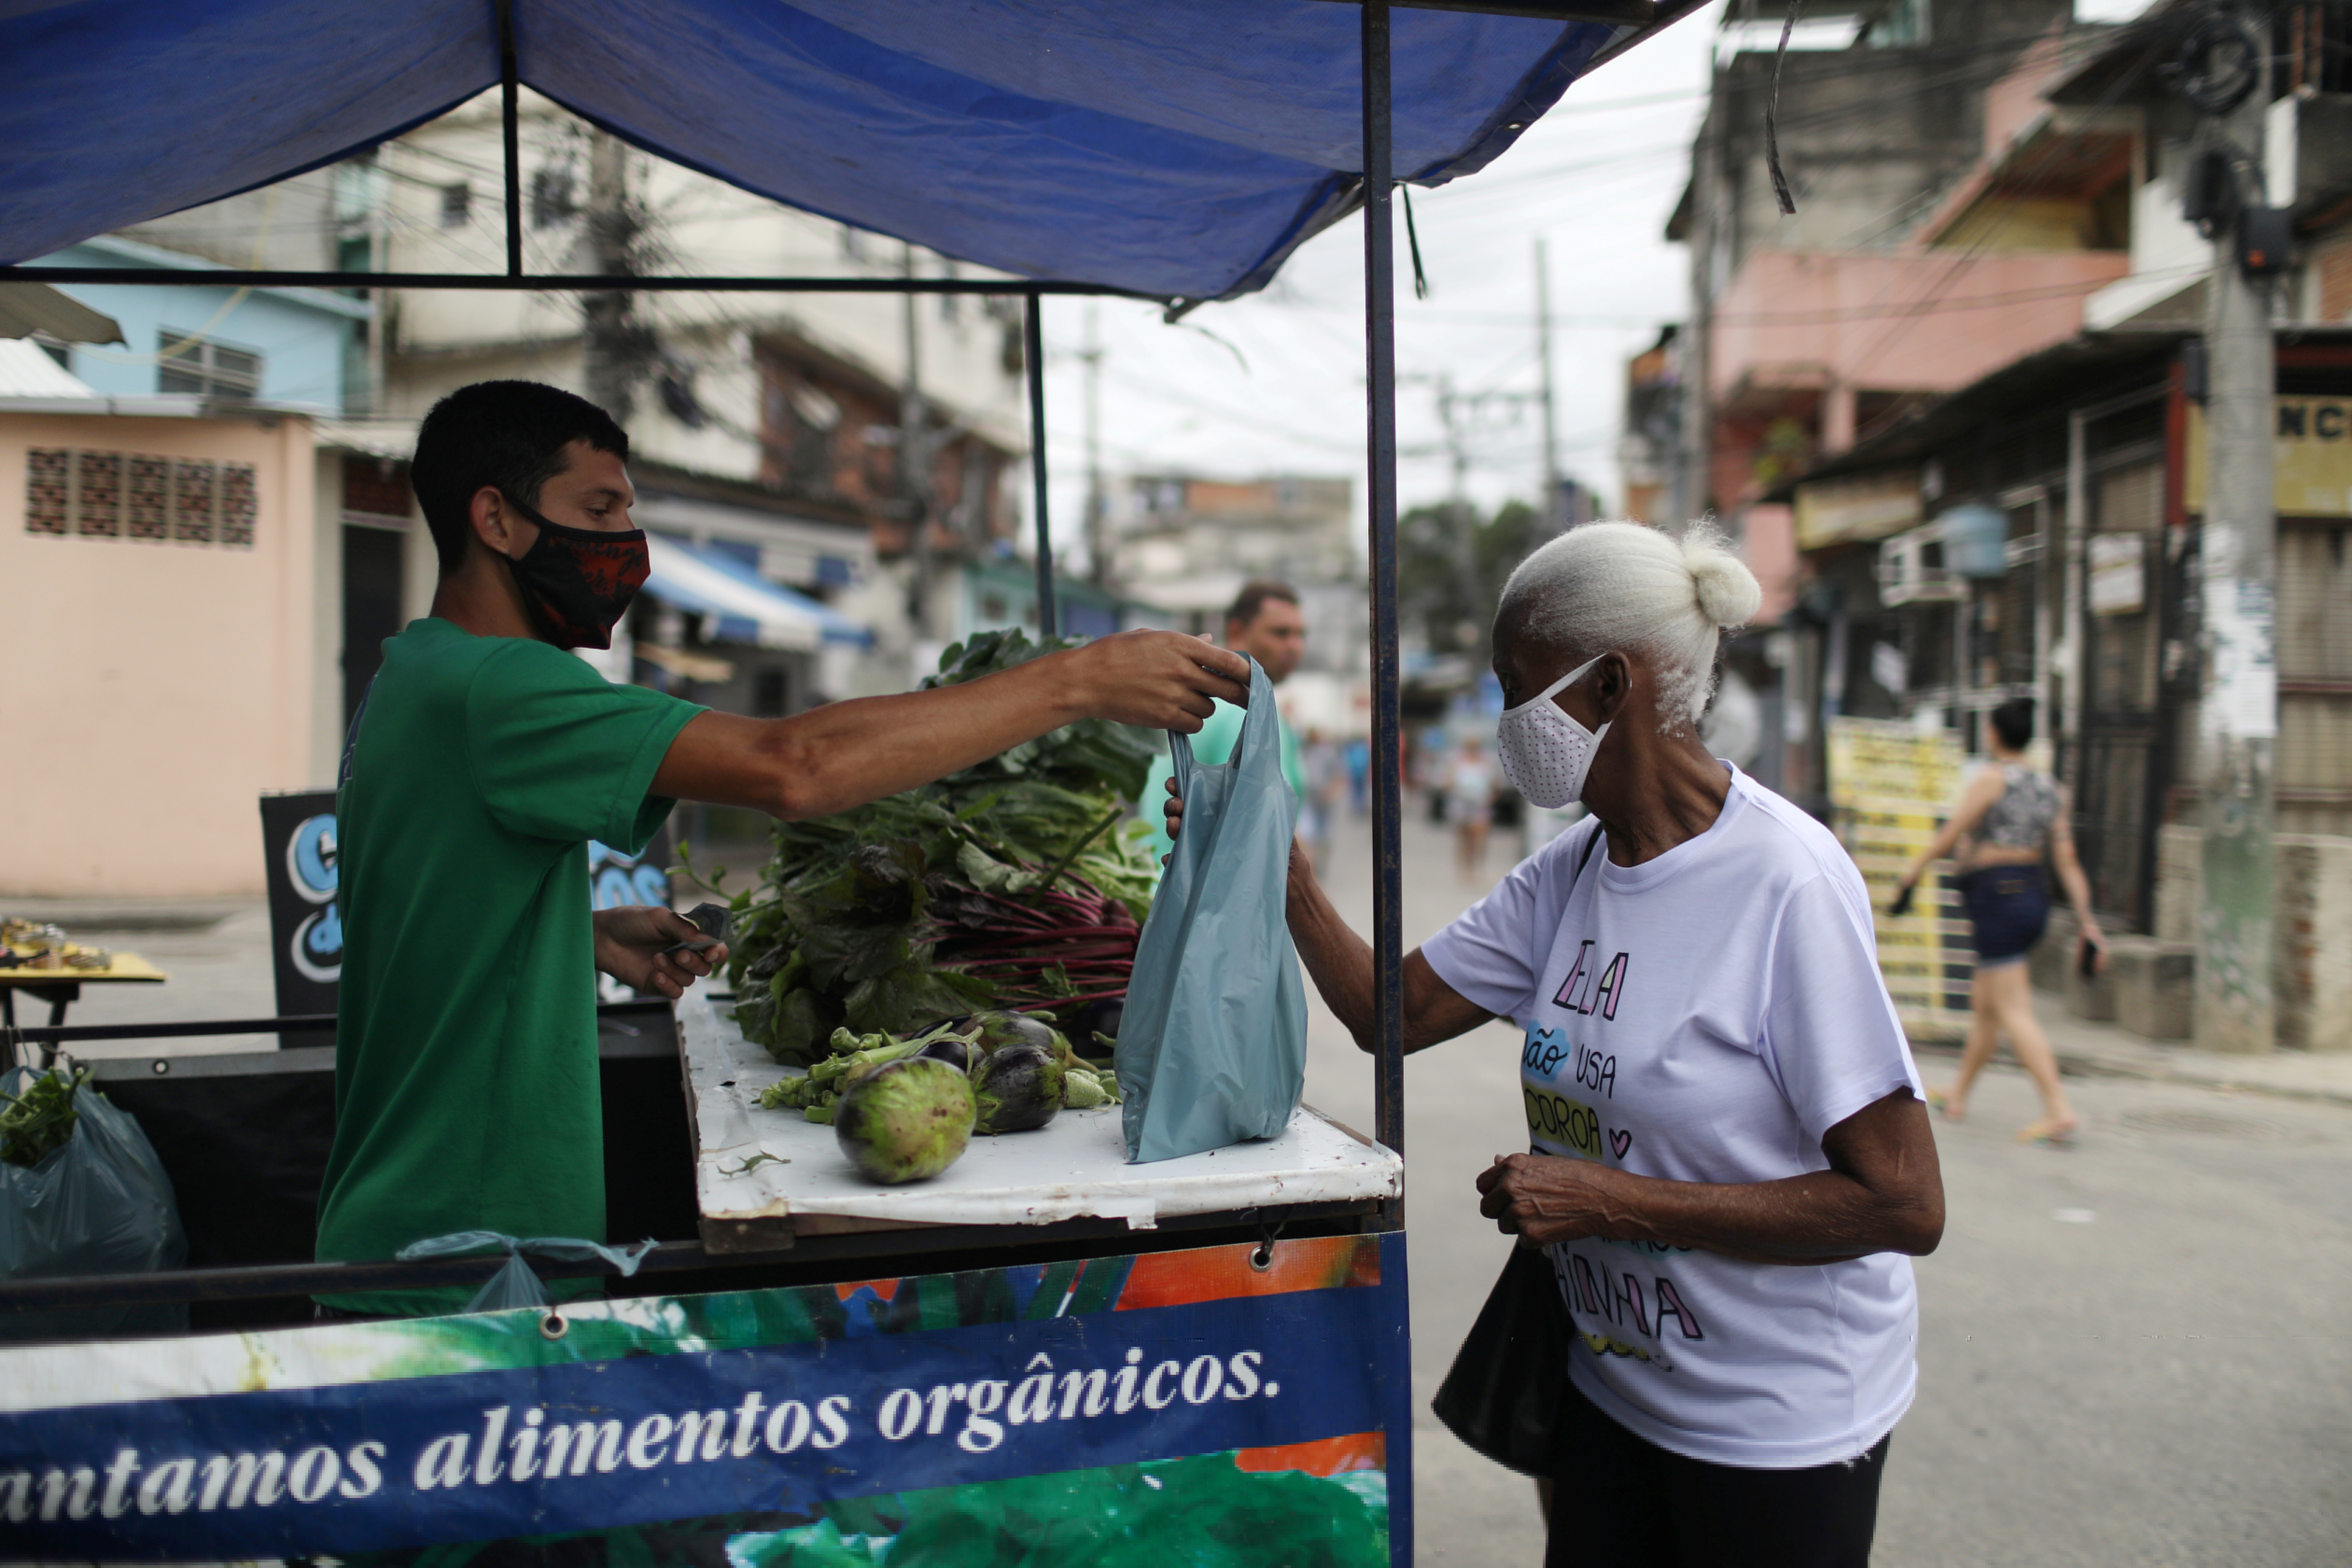 A woman buys vegetables from the Horta de Manguinhos (Manguinhos vegetable garden), the biggest urban garden in Latin America, part of the project 